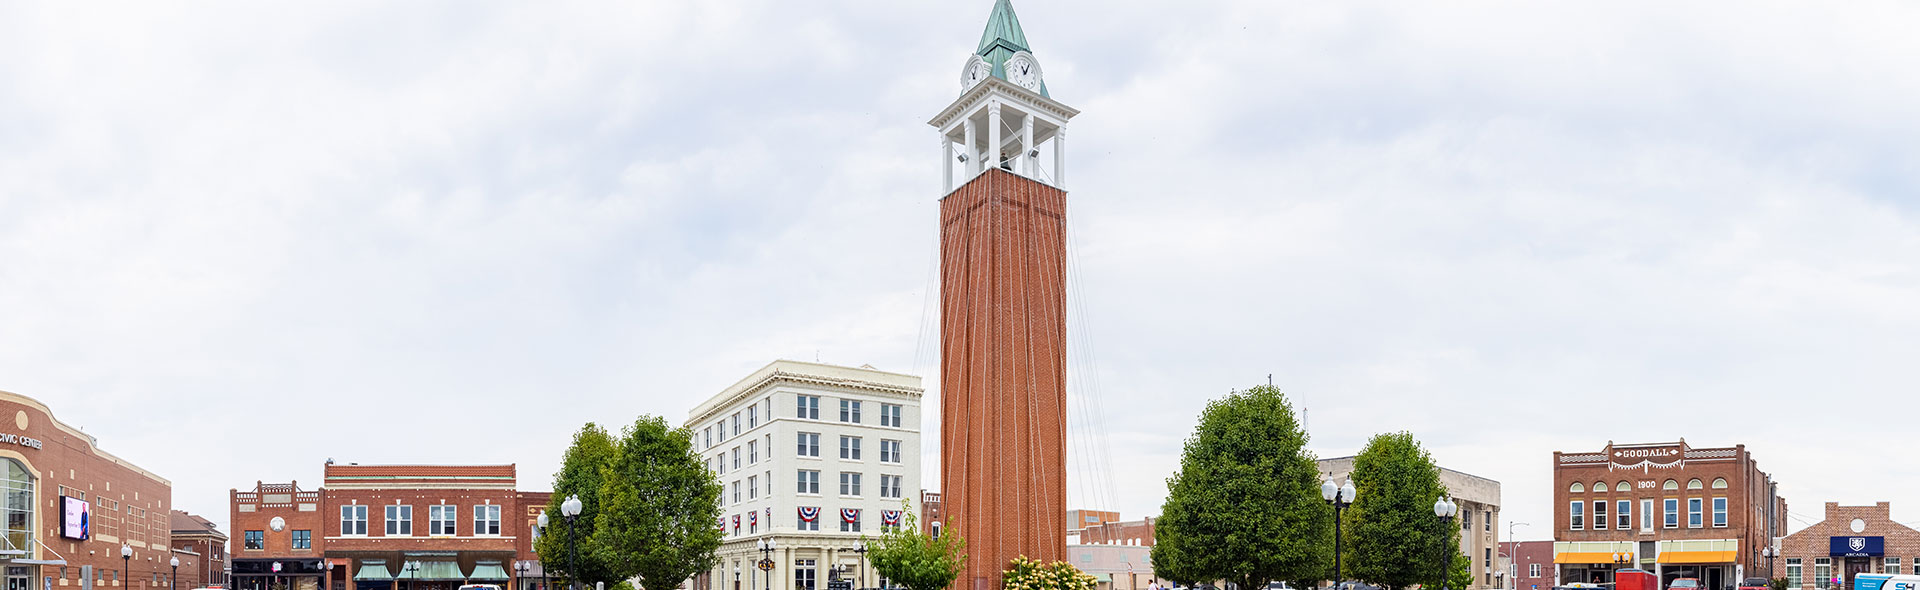 The clocktower at the Old Town Square in Marion, Illinois